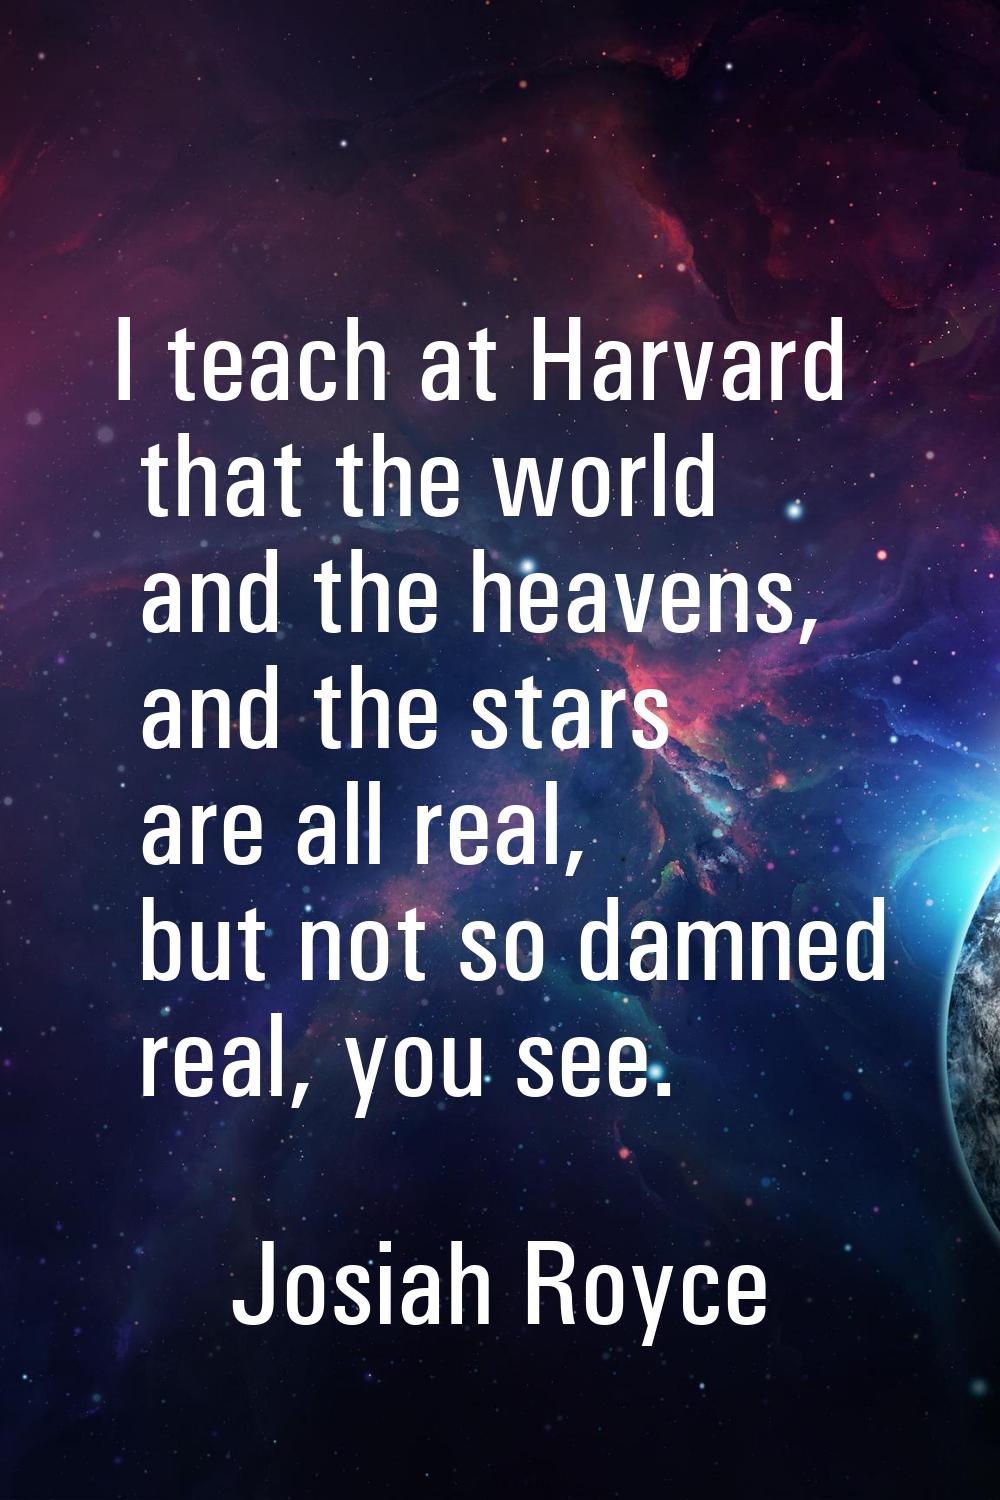 I teach at Harvard that the world and the heavens, and the stars are all real, but not so damned re